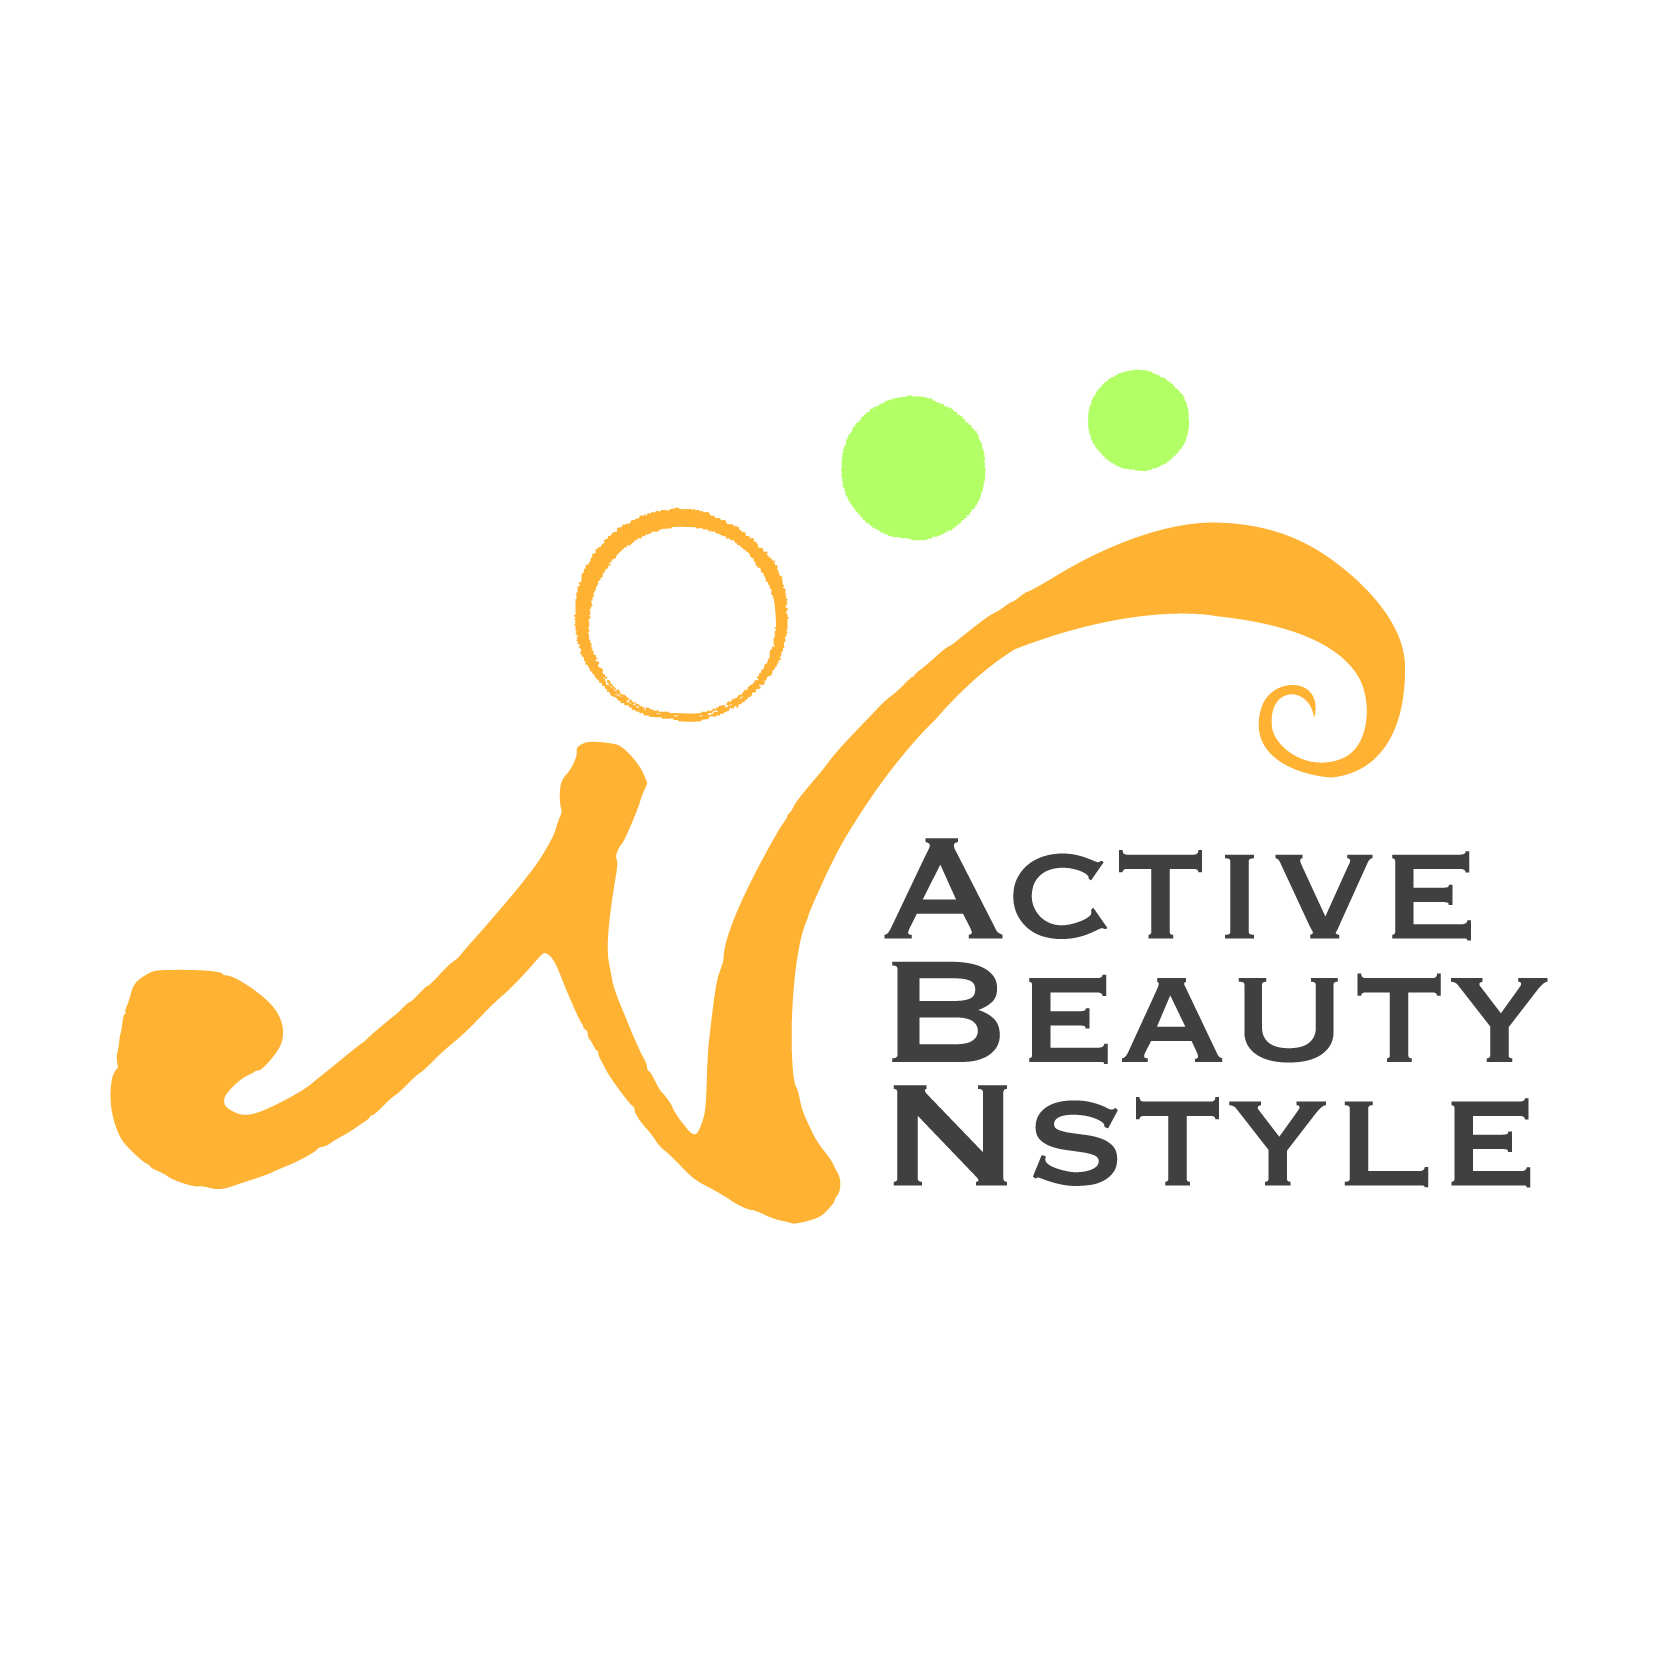 Active beauty N style　茂木伸江さんのロゴ